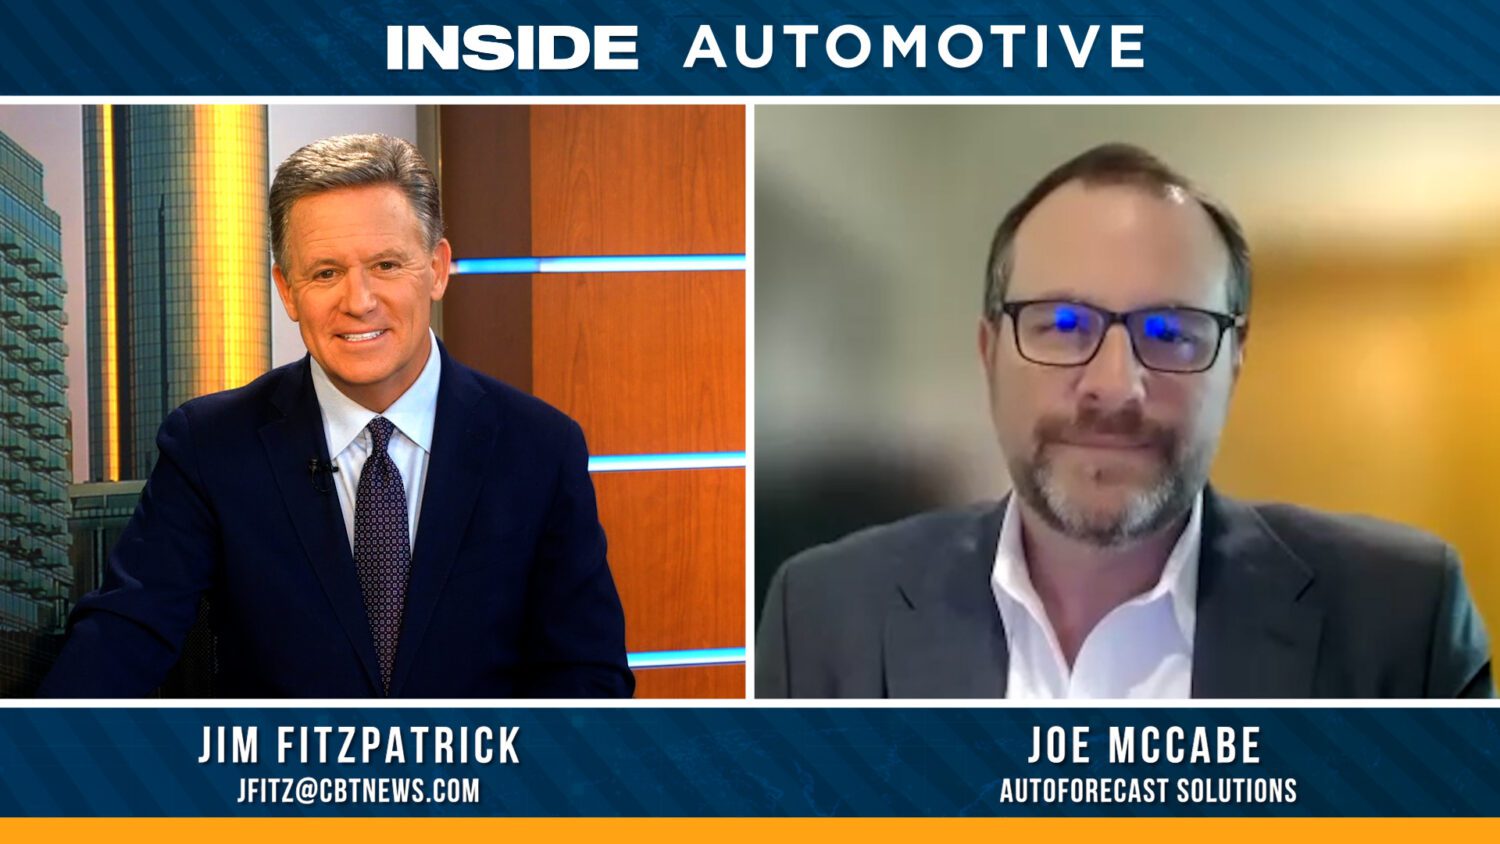 Joe McCabe joins Inside Automotive to discuss the car business and the developing trends which could dictate the future of retail automotive.